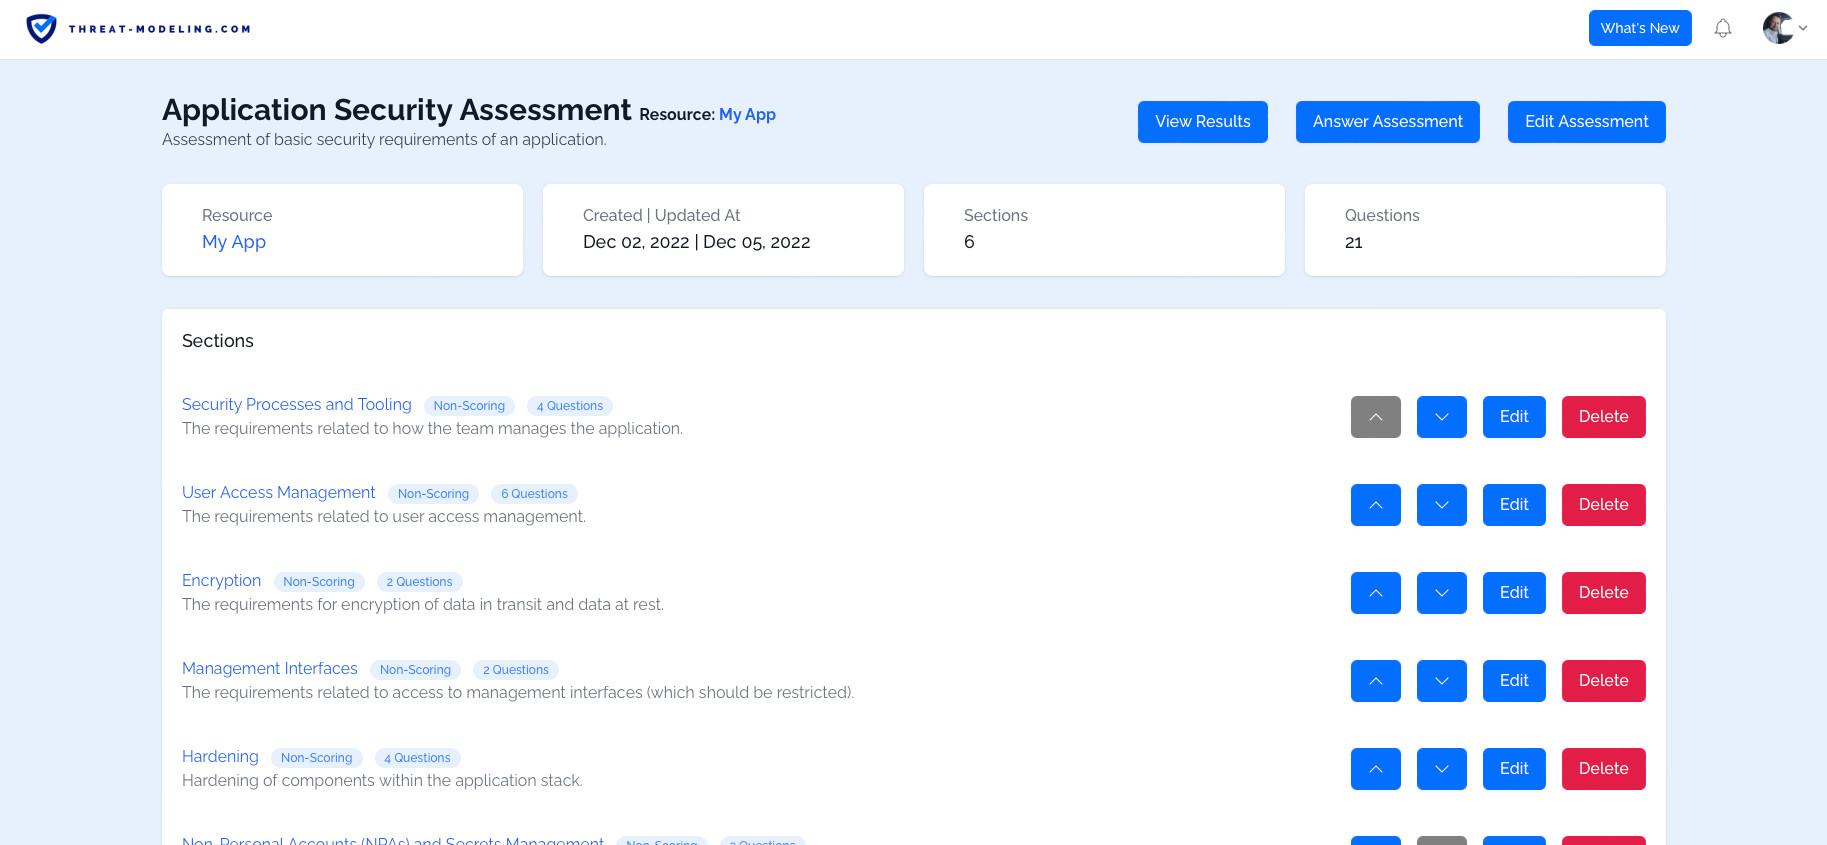 Threat Modeling Tool - Assessment Overview